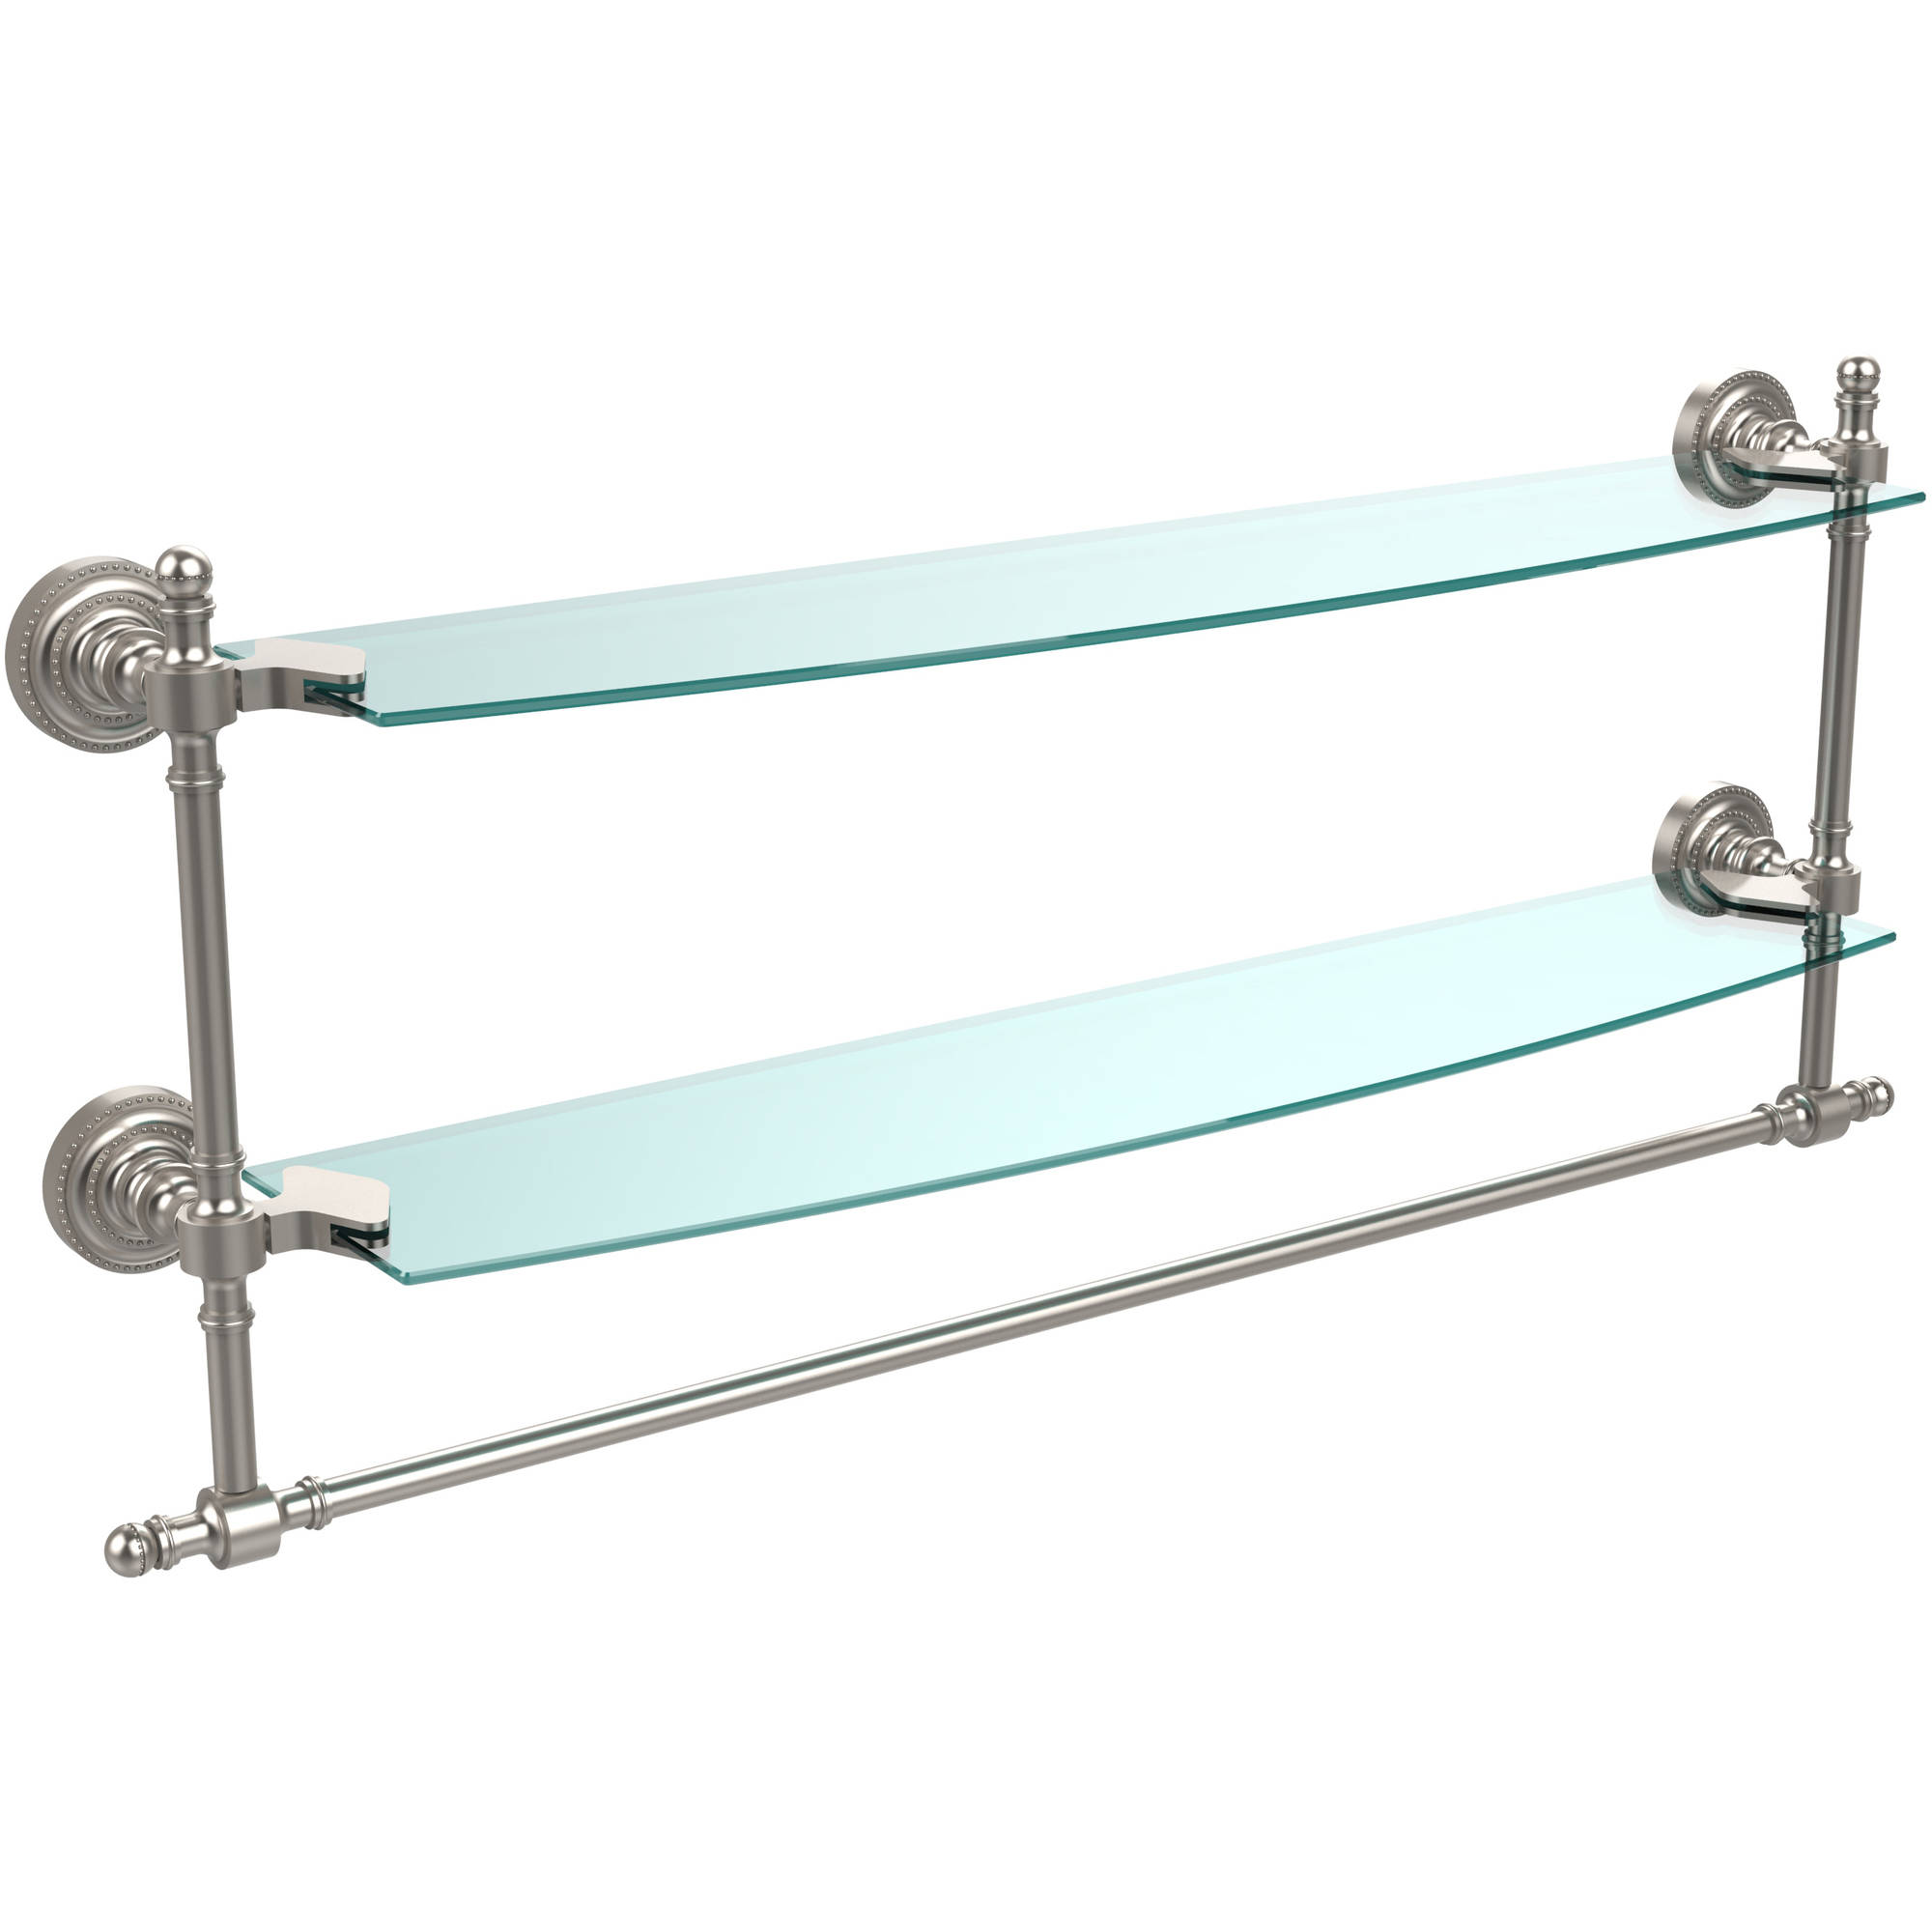 Retro Dot 24'' Two Tiered Glass Shelf with Towel Bar in Satin Nickel - image 1 of 2